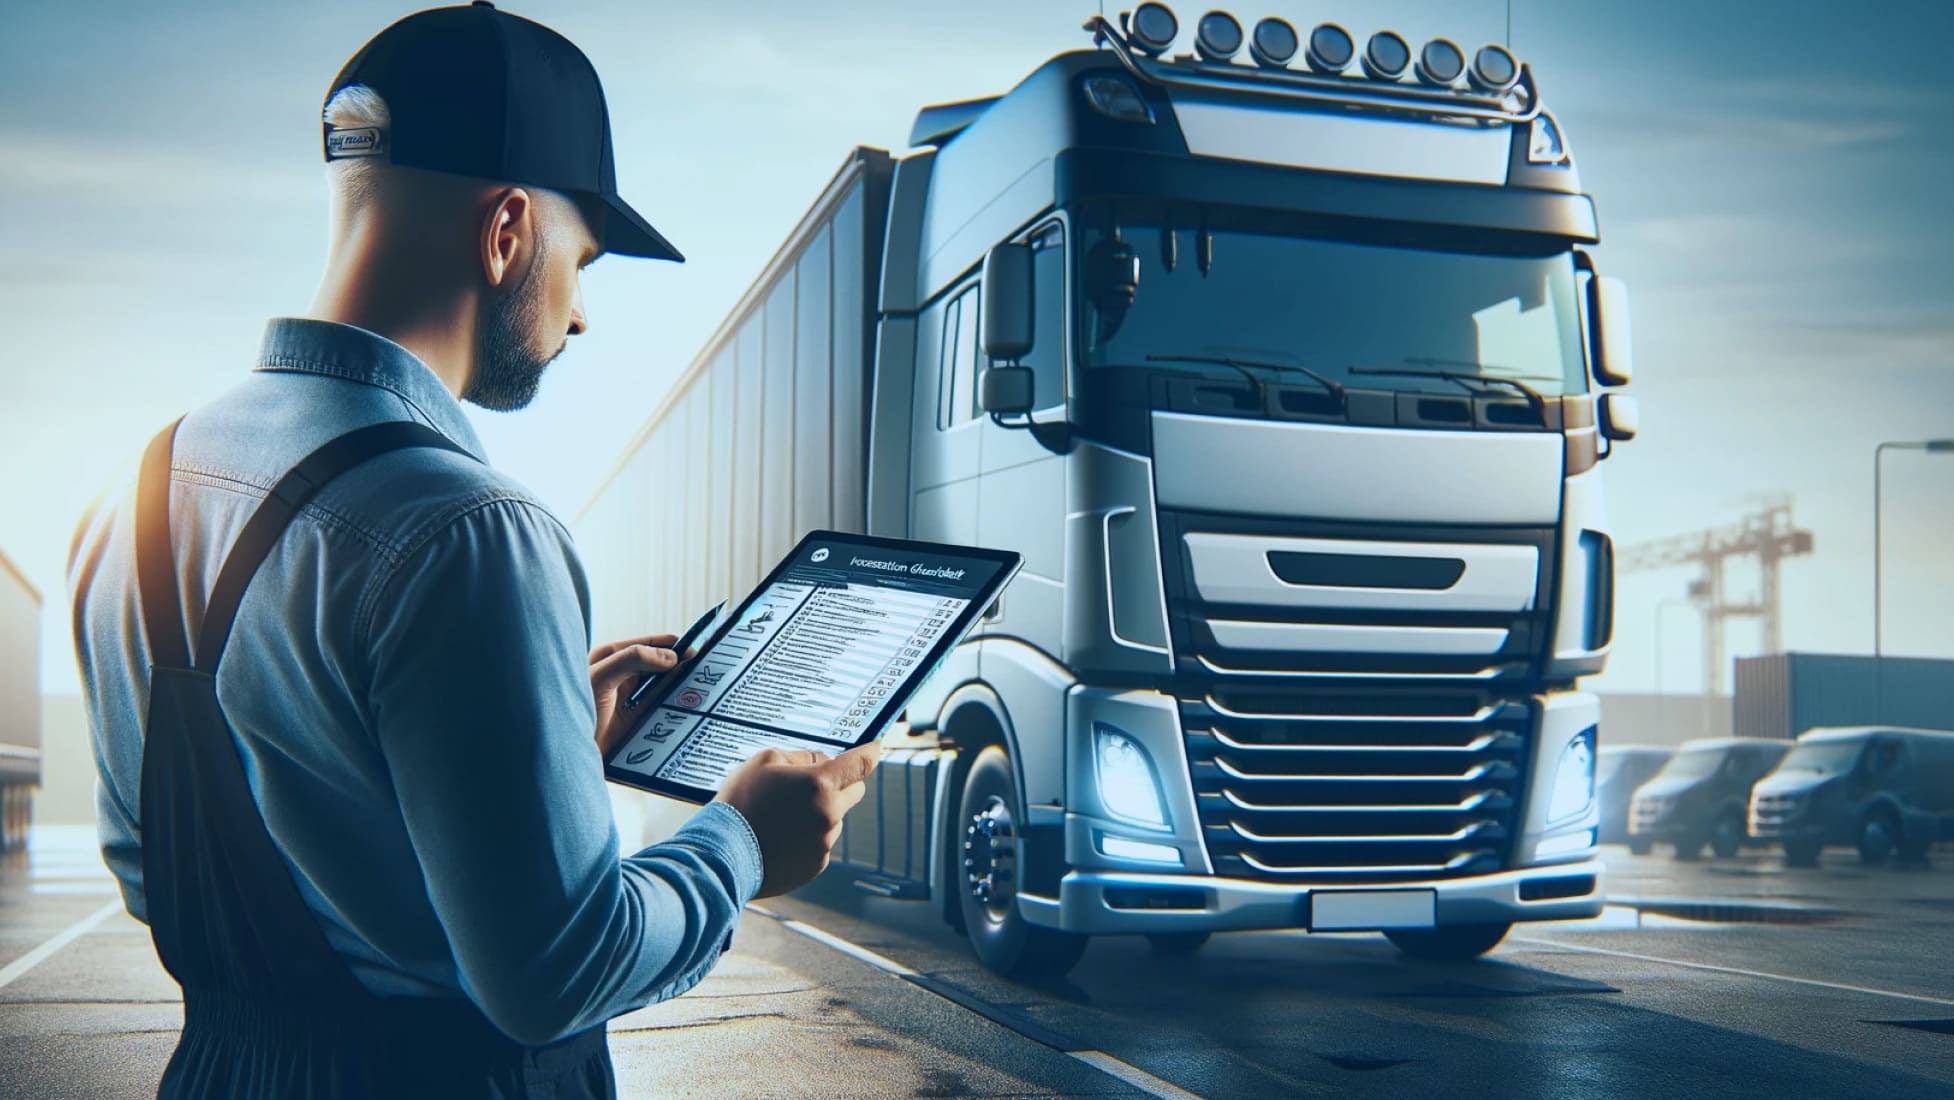 Heavy Vehicle Inspection Software